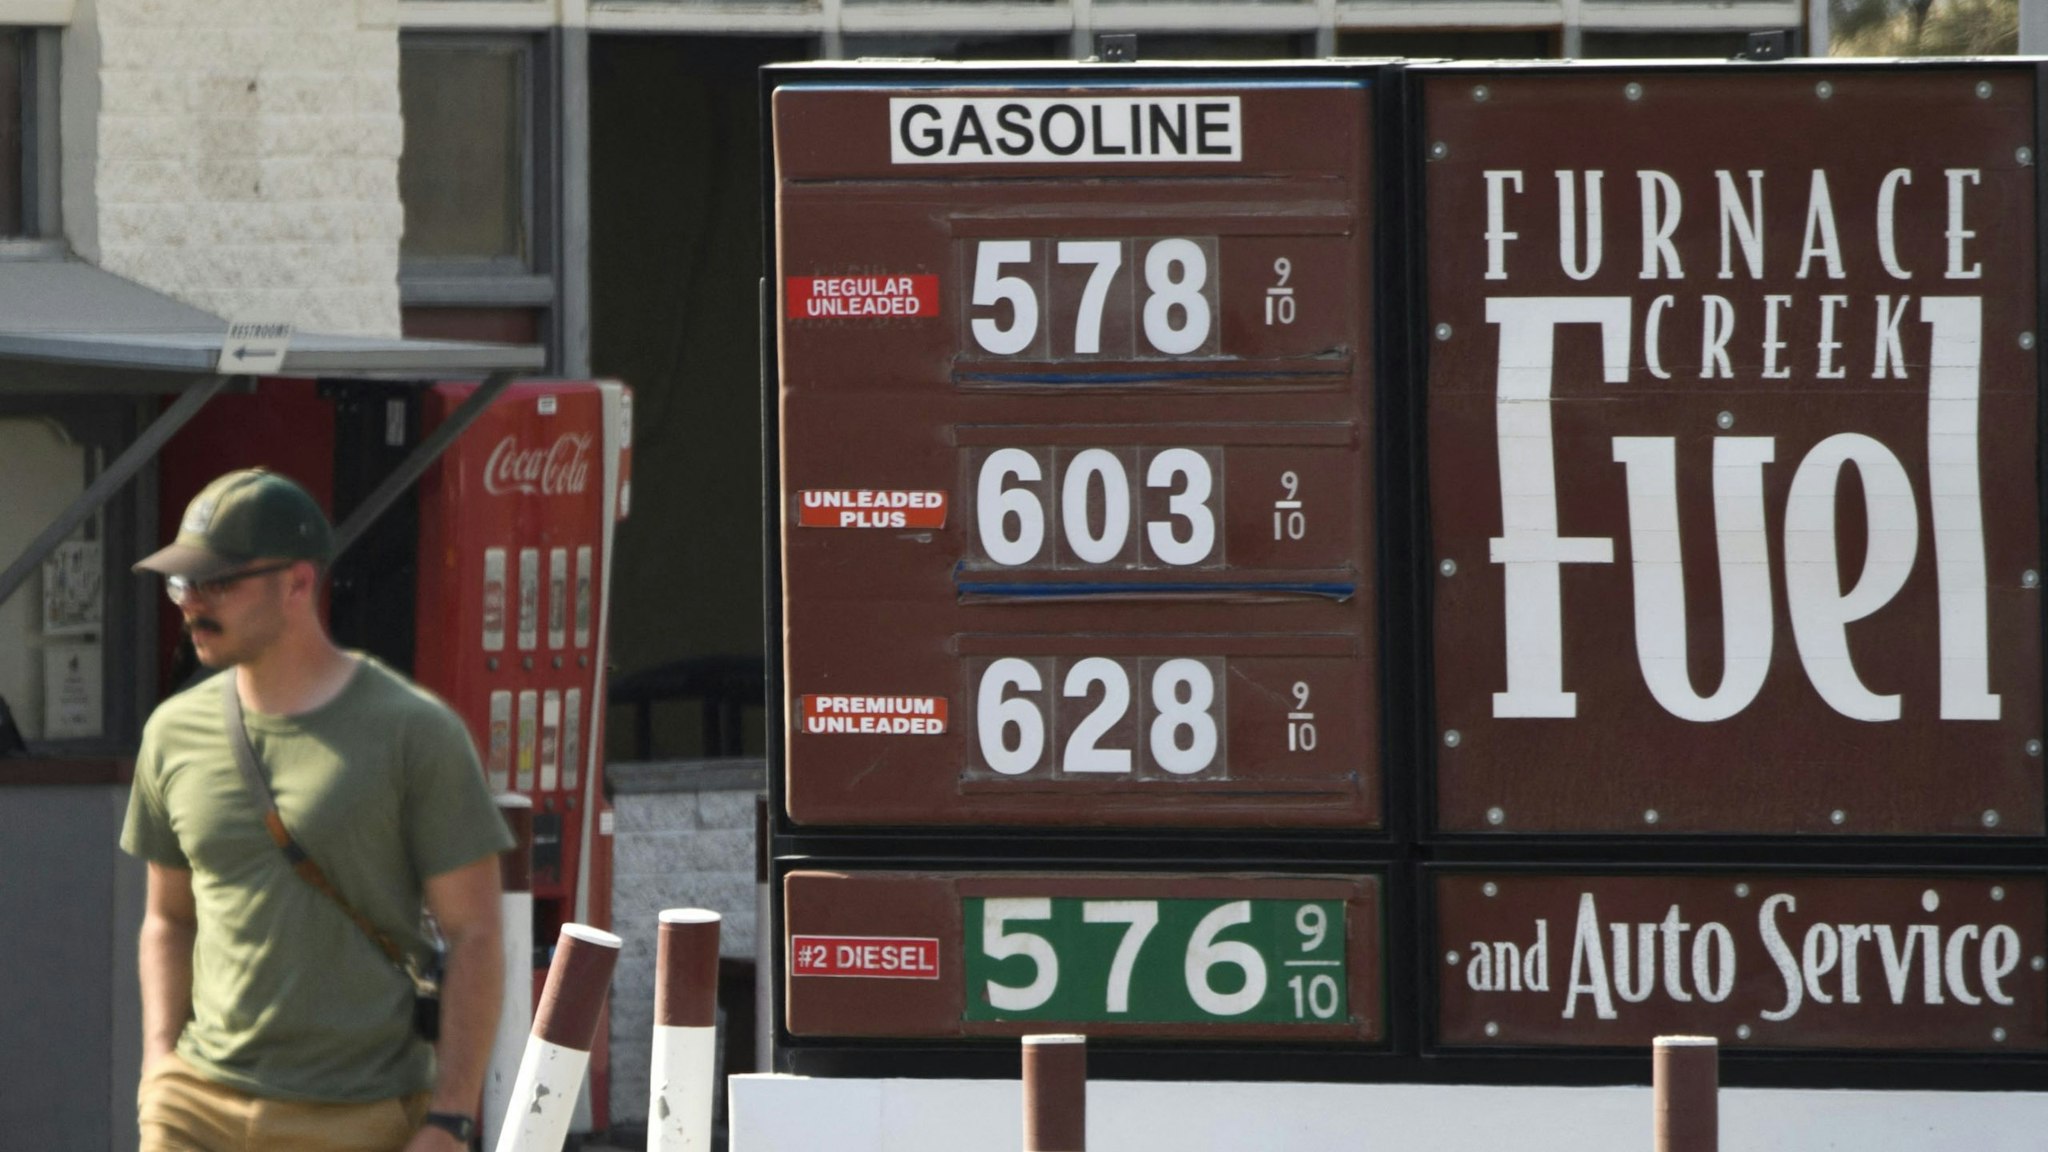 A pedestrian walks past gas station fuel prices above $5 and $6 per gallon at Death Valley National Park in June 17, 2021 in Furnace Creek, California. - Much of the western United States is braced for record heat waves this week, with approximately 50 million Americans placed on alert Tuesday for "excessive" temperatures, which could approach 120 degrees Fahrenheit (50 degrees Celsius) in some areas. The National Park Service warns of extreme summer heat, urging tourists to carry extra water and "travel prepared to survive" in the hottest, lowest, and driest national park featuring steady drought and extreme climates.